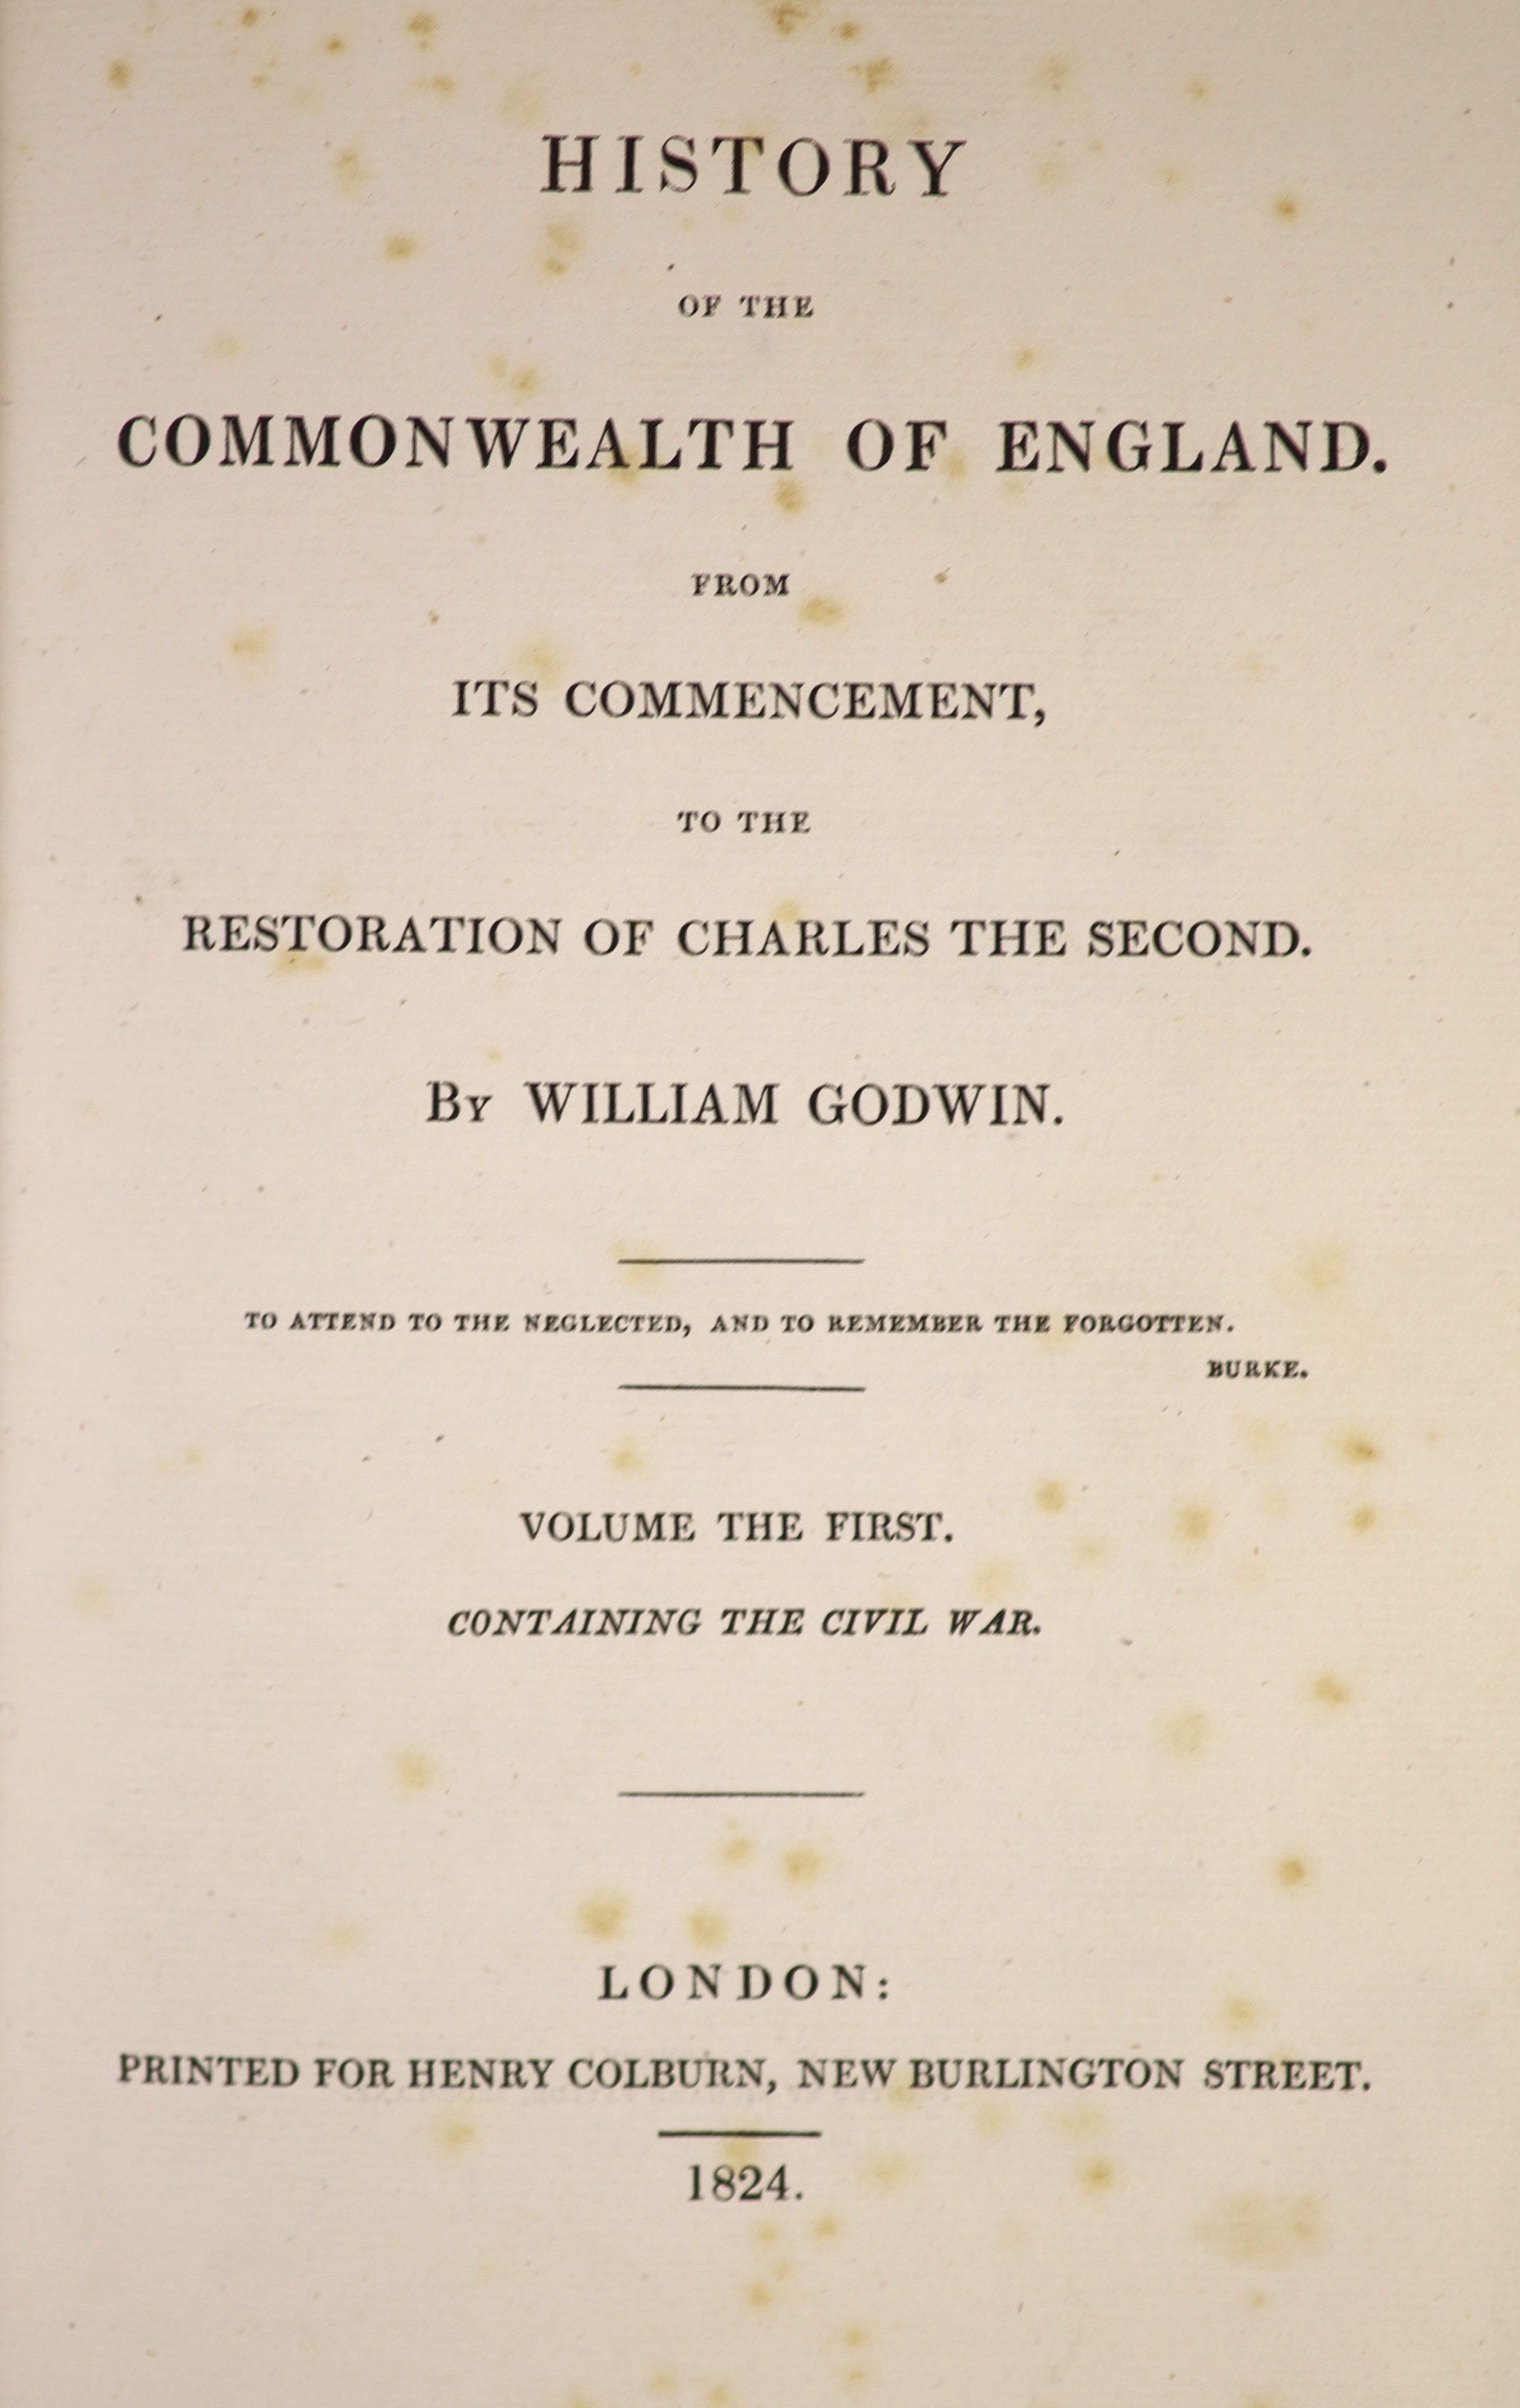 Godwin, William - History of the Commonwealth of England... vols 1+2 (of 4). Tanned calf, gilt ruled and decorated spines with 2 Morocco labels to each. 8vo. Henry Colburn, London, 1824.